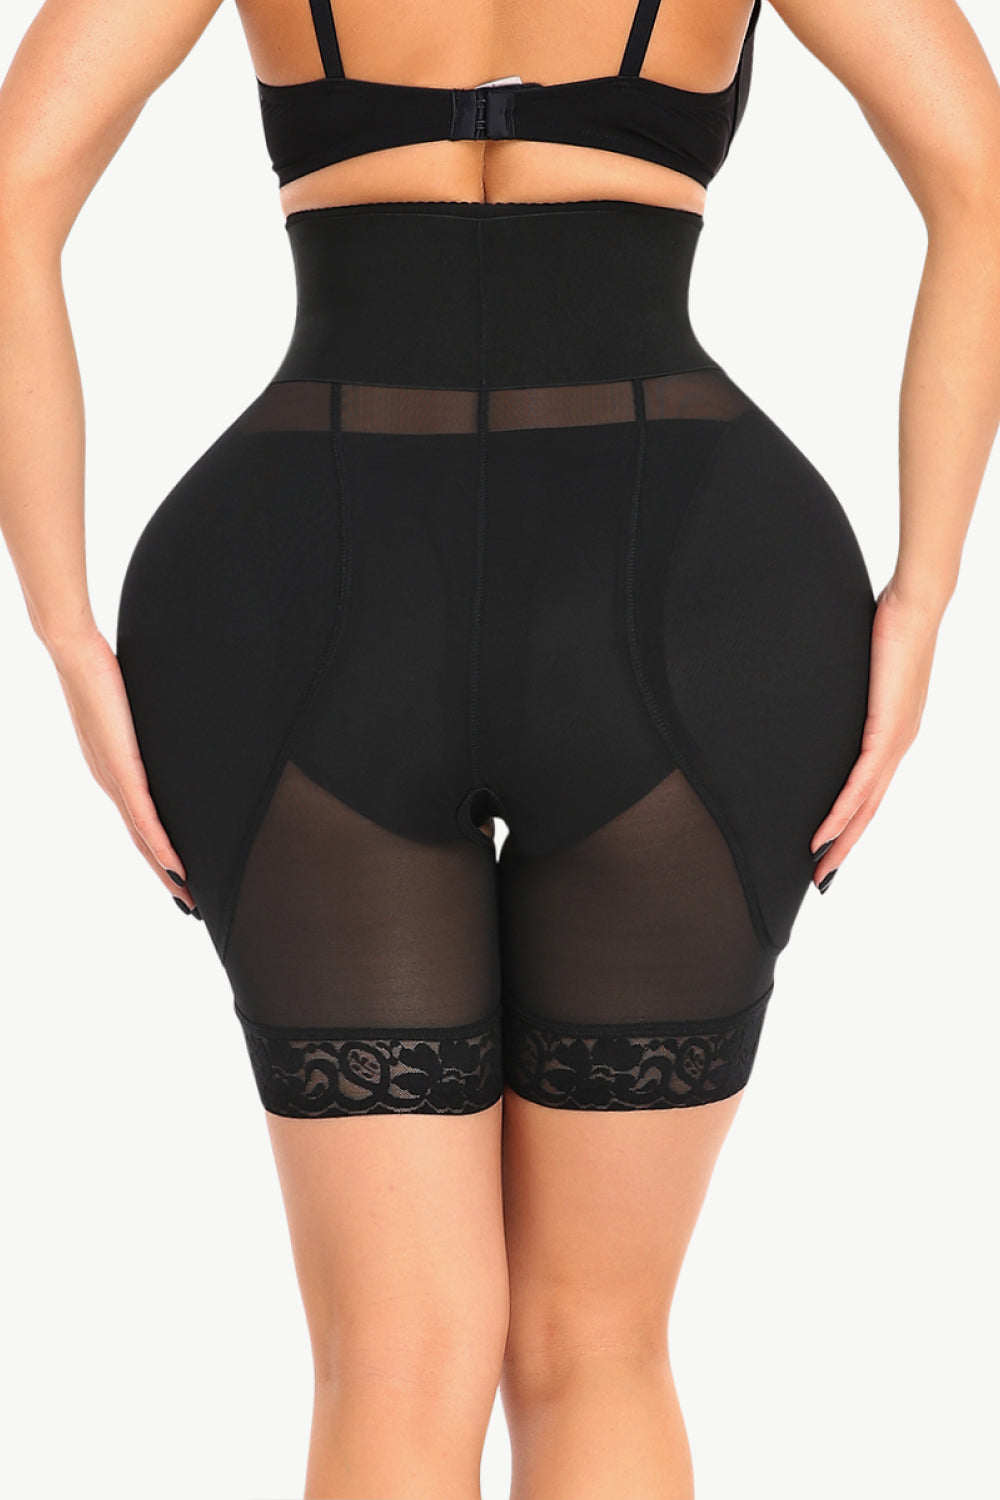 ChicCurve - New Arrival Beautiful Shapewear🔥🔥🔥 Just 💲55.44 Dollars.  Come and buy it! 👉👉 12% Off for New Customers.  Code: XY268 🛒🛒 #fajas #fajascolombianas #bodysuit #shapewear #bbl  #lacebodysuit #Chiccurve #girls #women